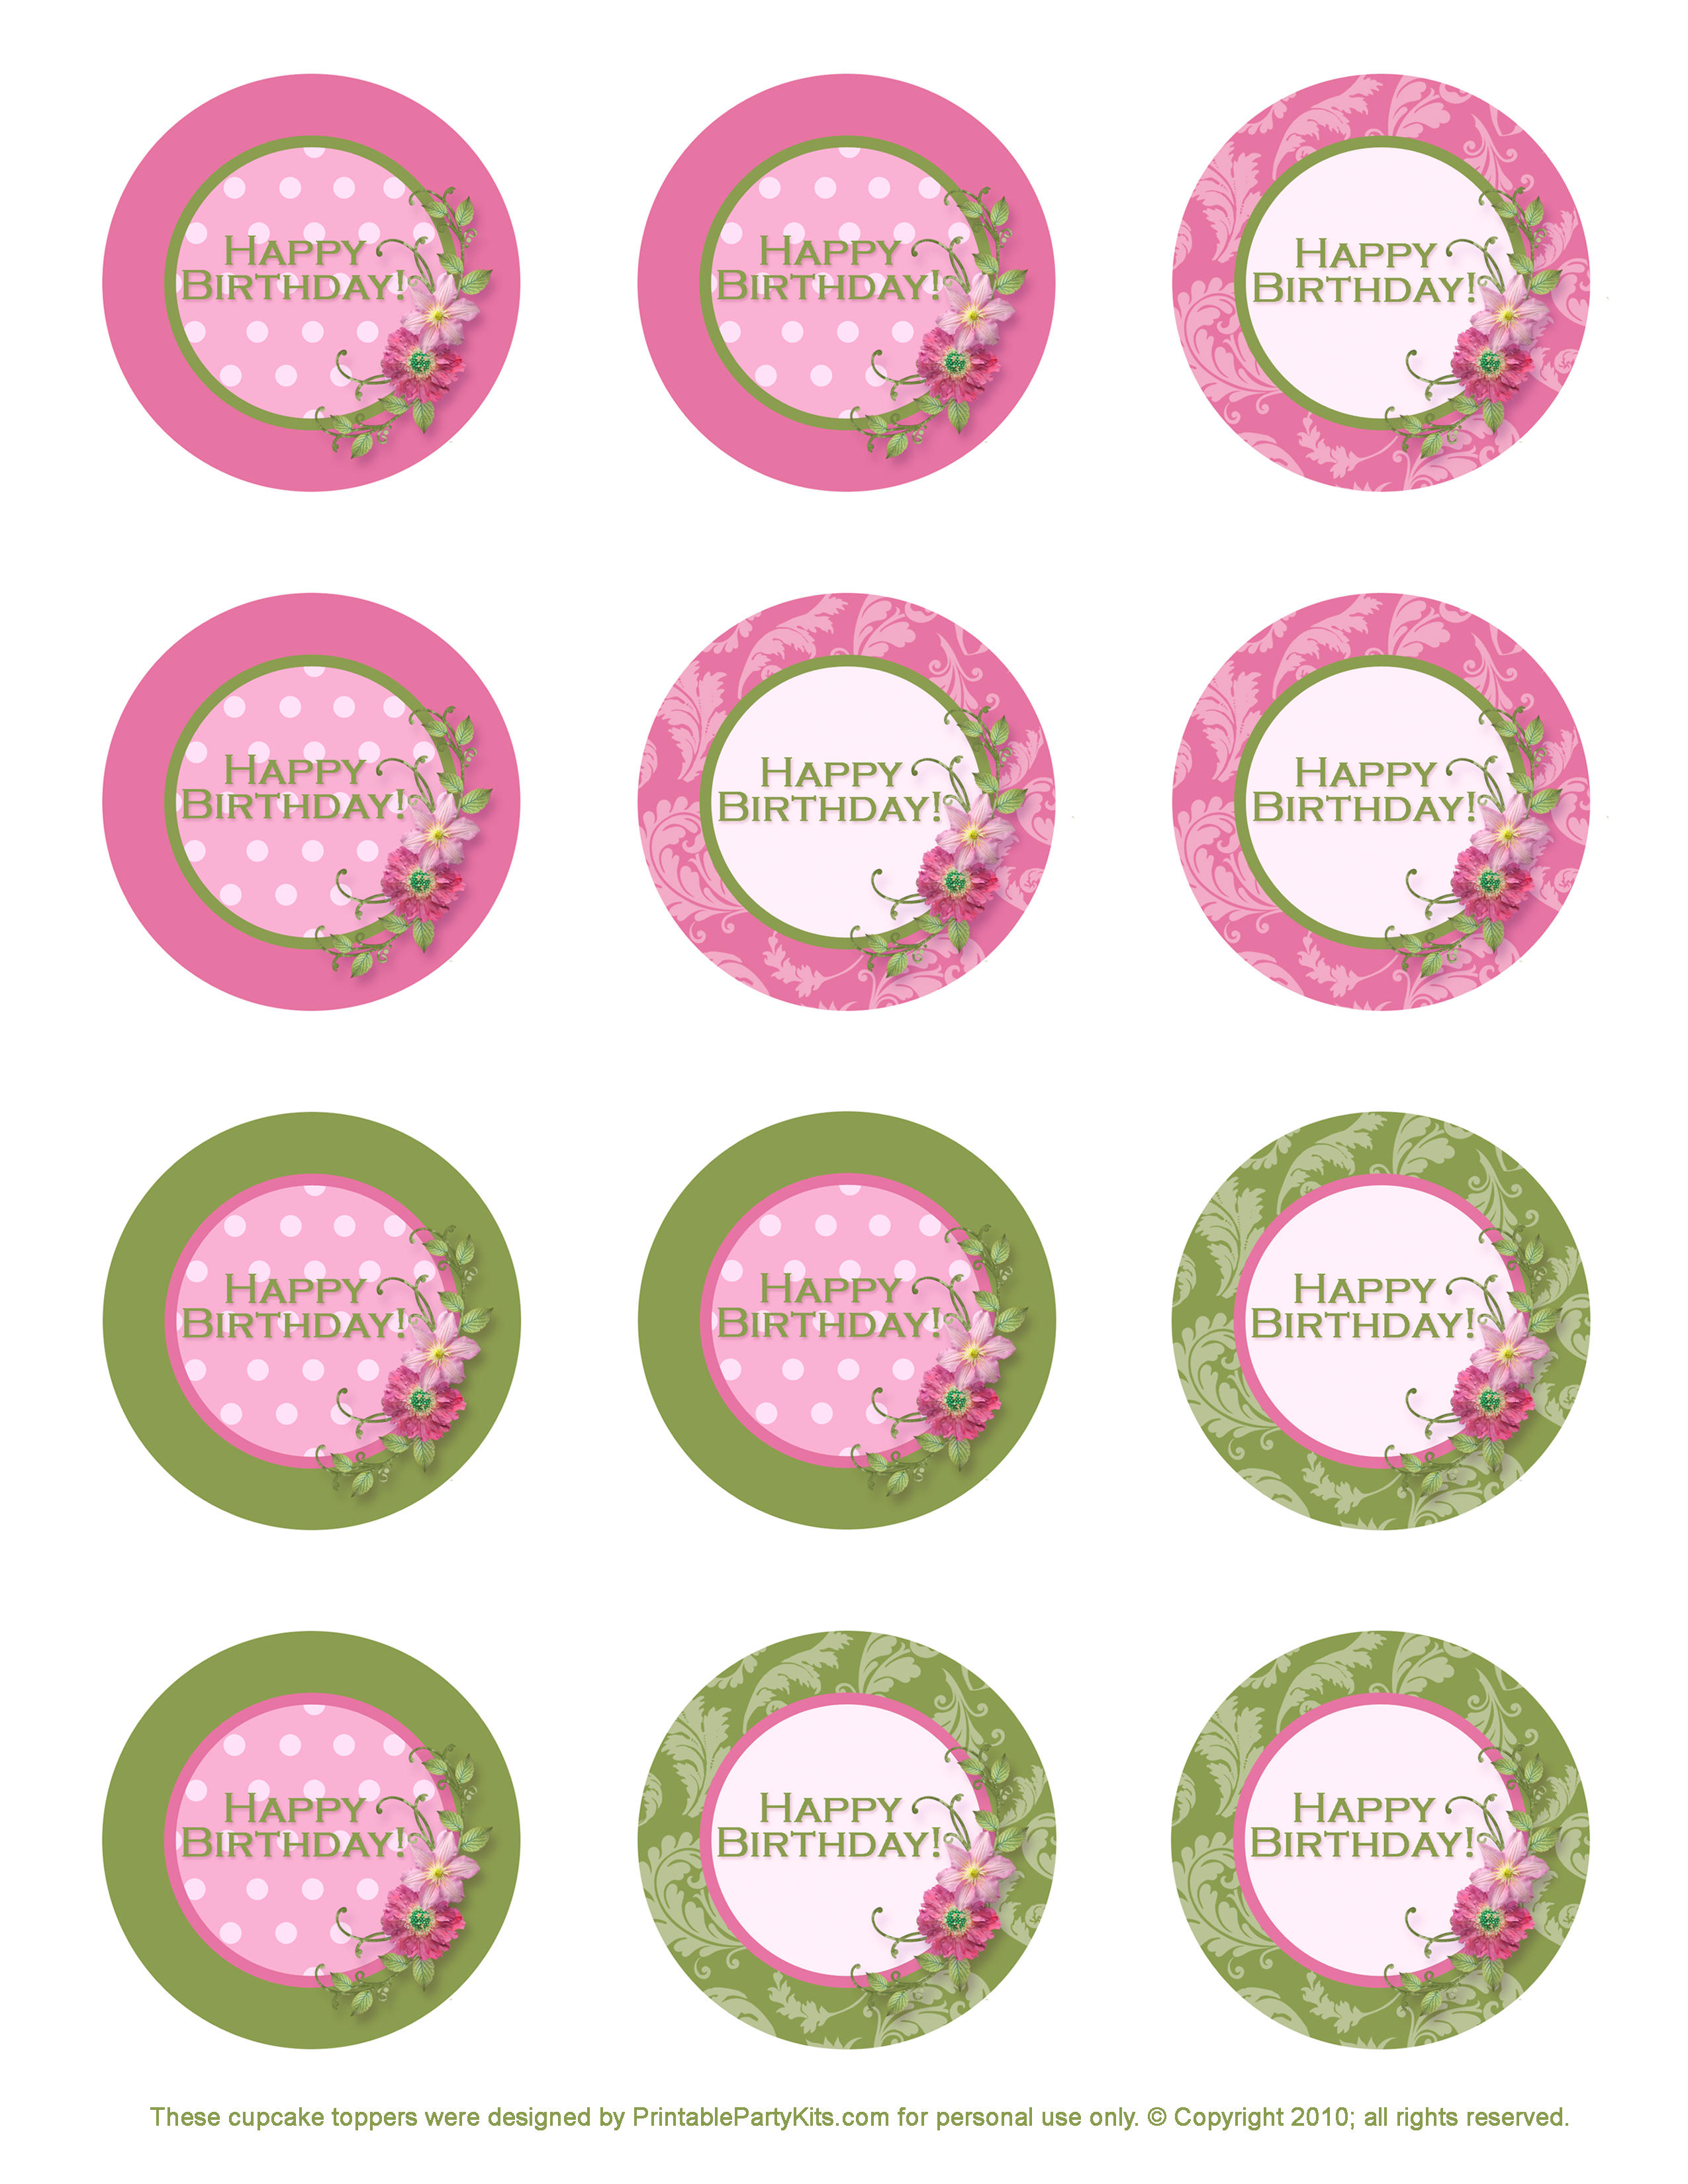 http://printablepartykits.com/birthday-cupcake-toppers/